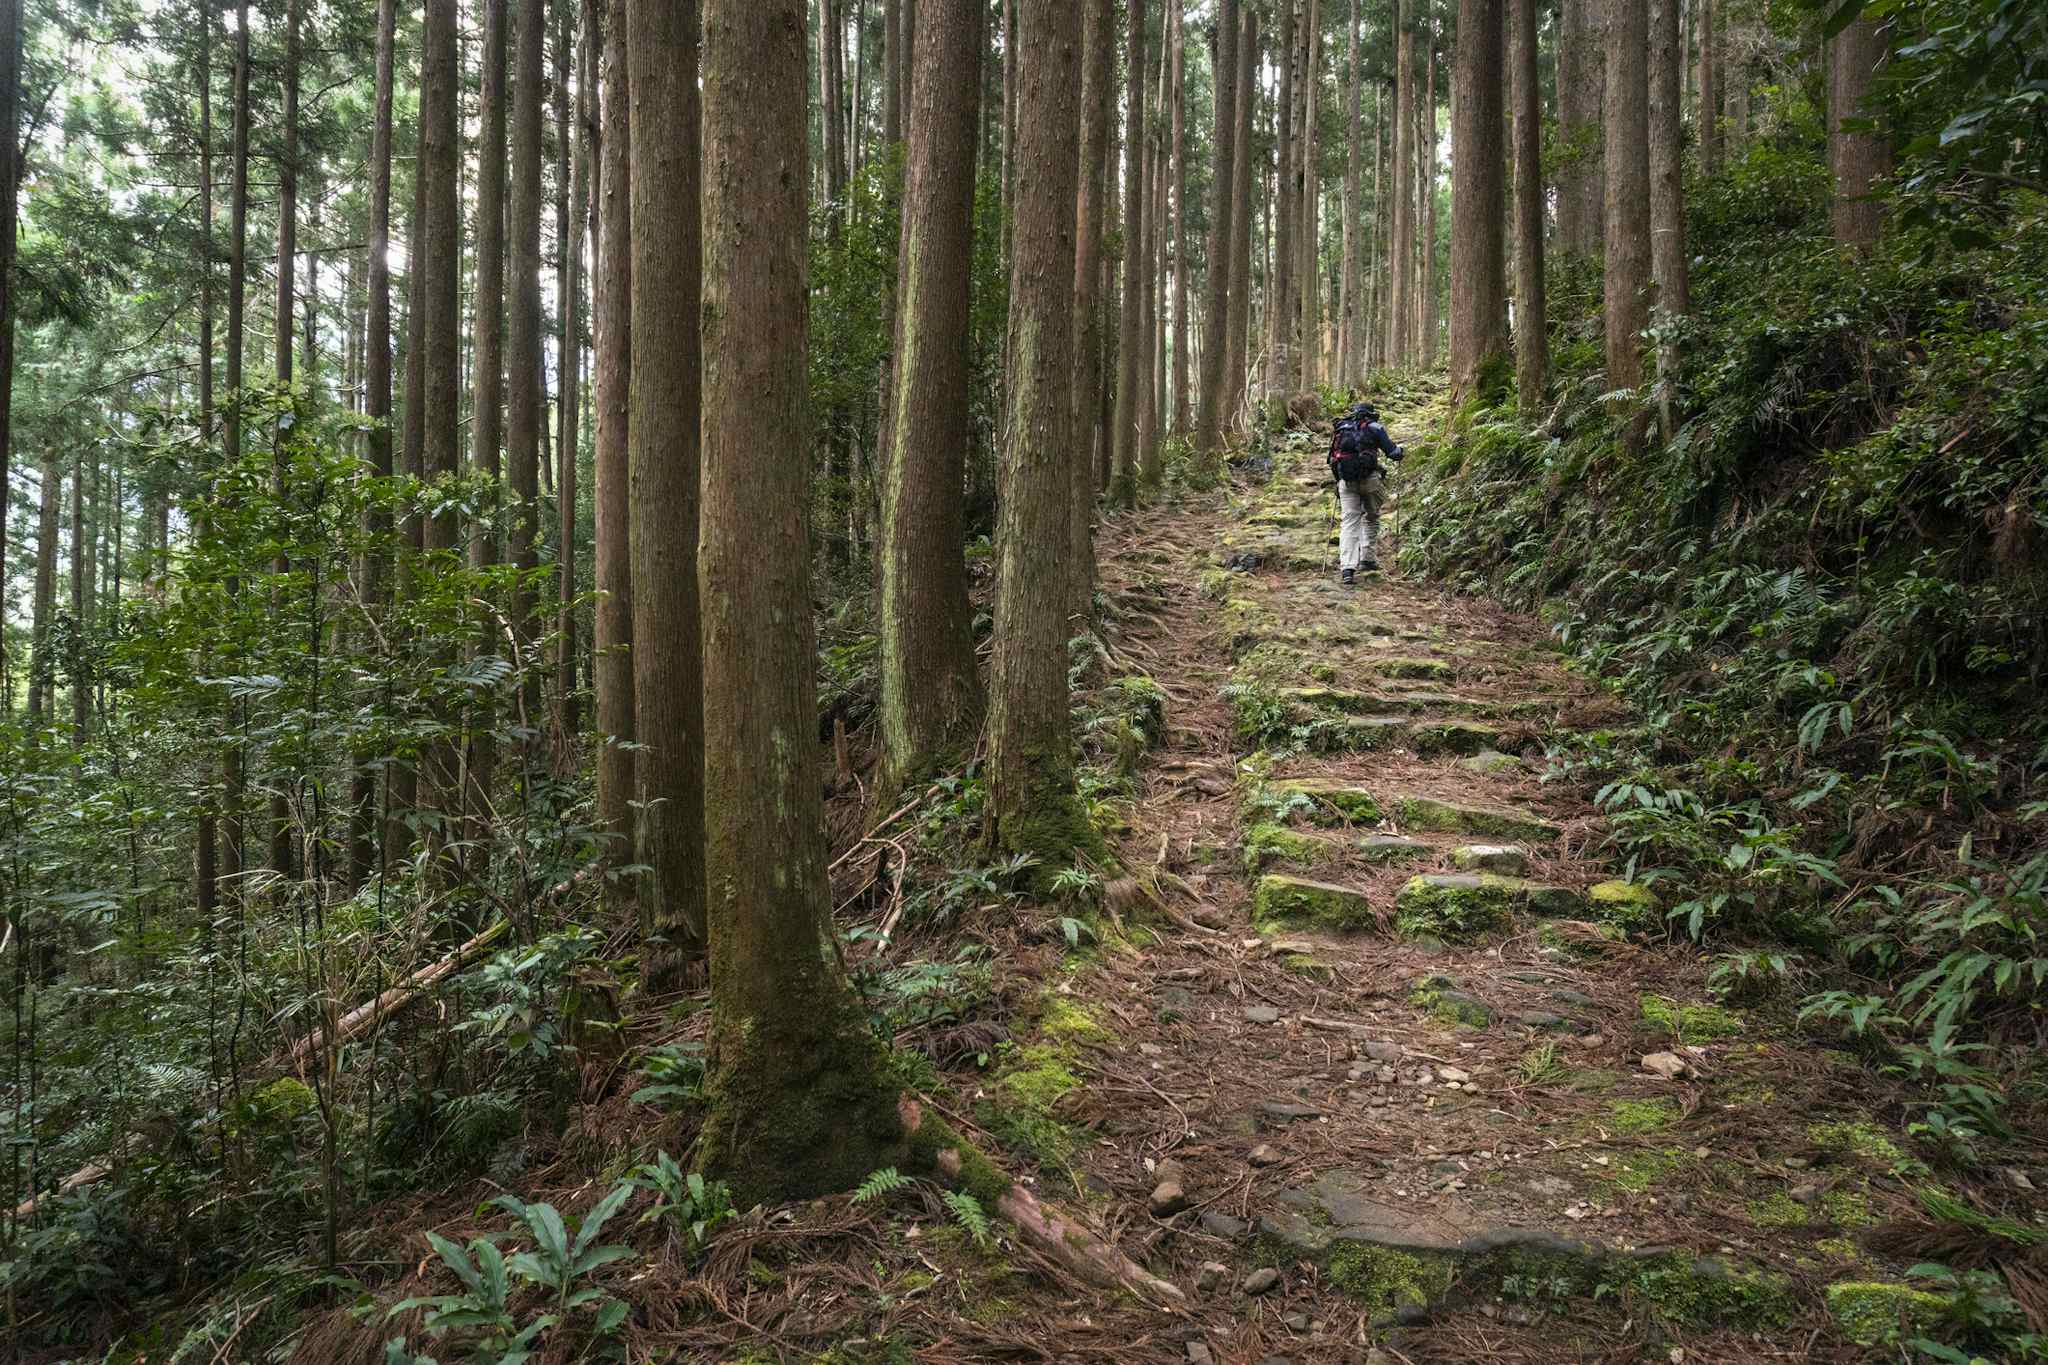 The quiet pine forests of the Kumano Kodo trail. Photo: Getty.